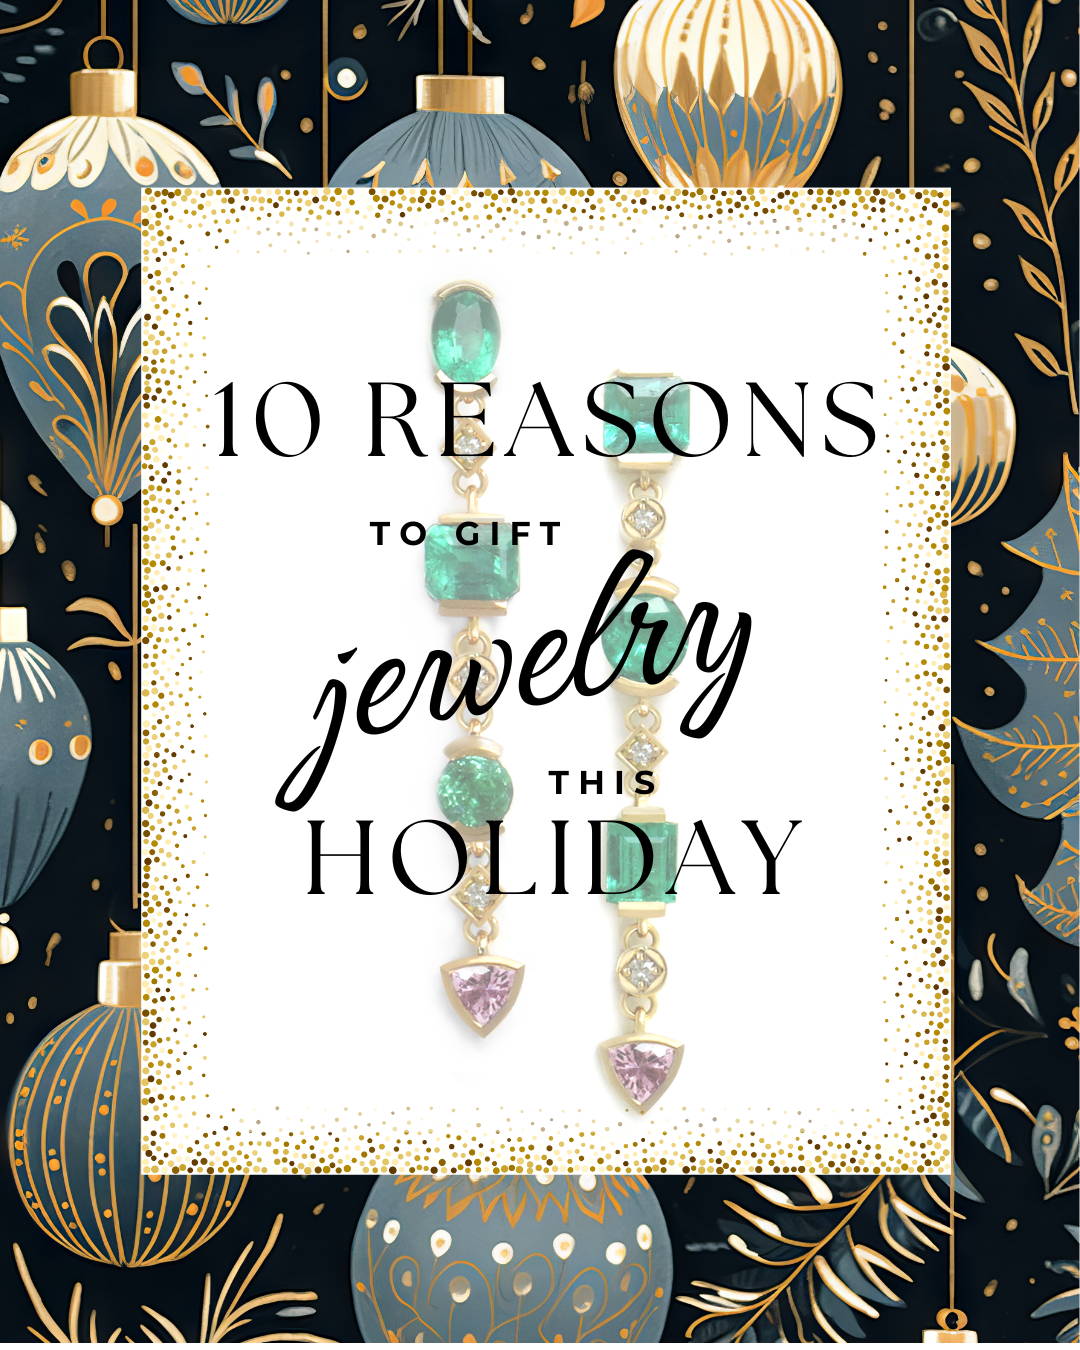 10 reasons to gift jewelry during this holiday. Emerald earrings with pink sapphires.